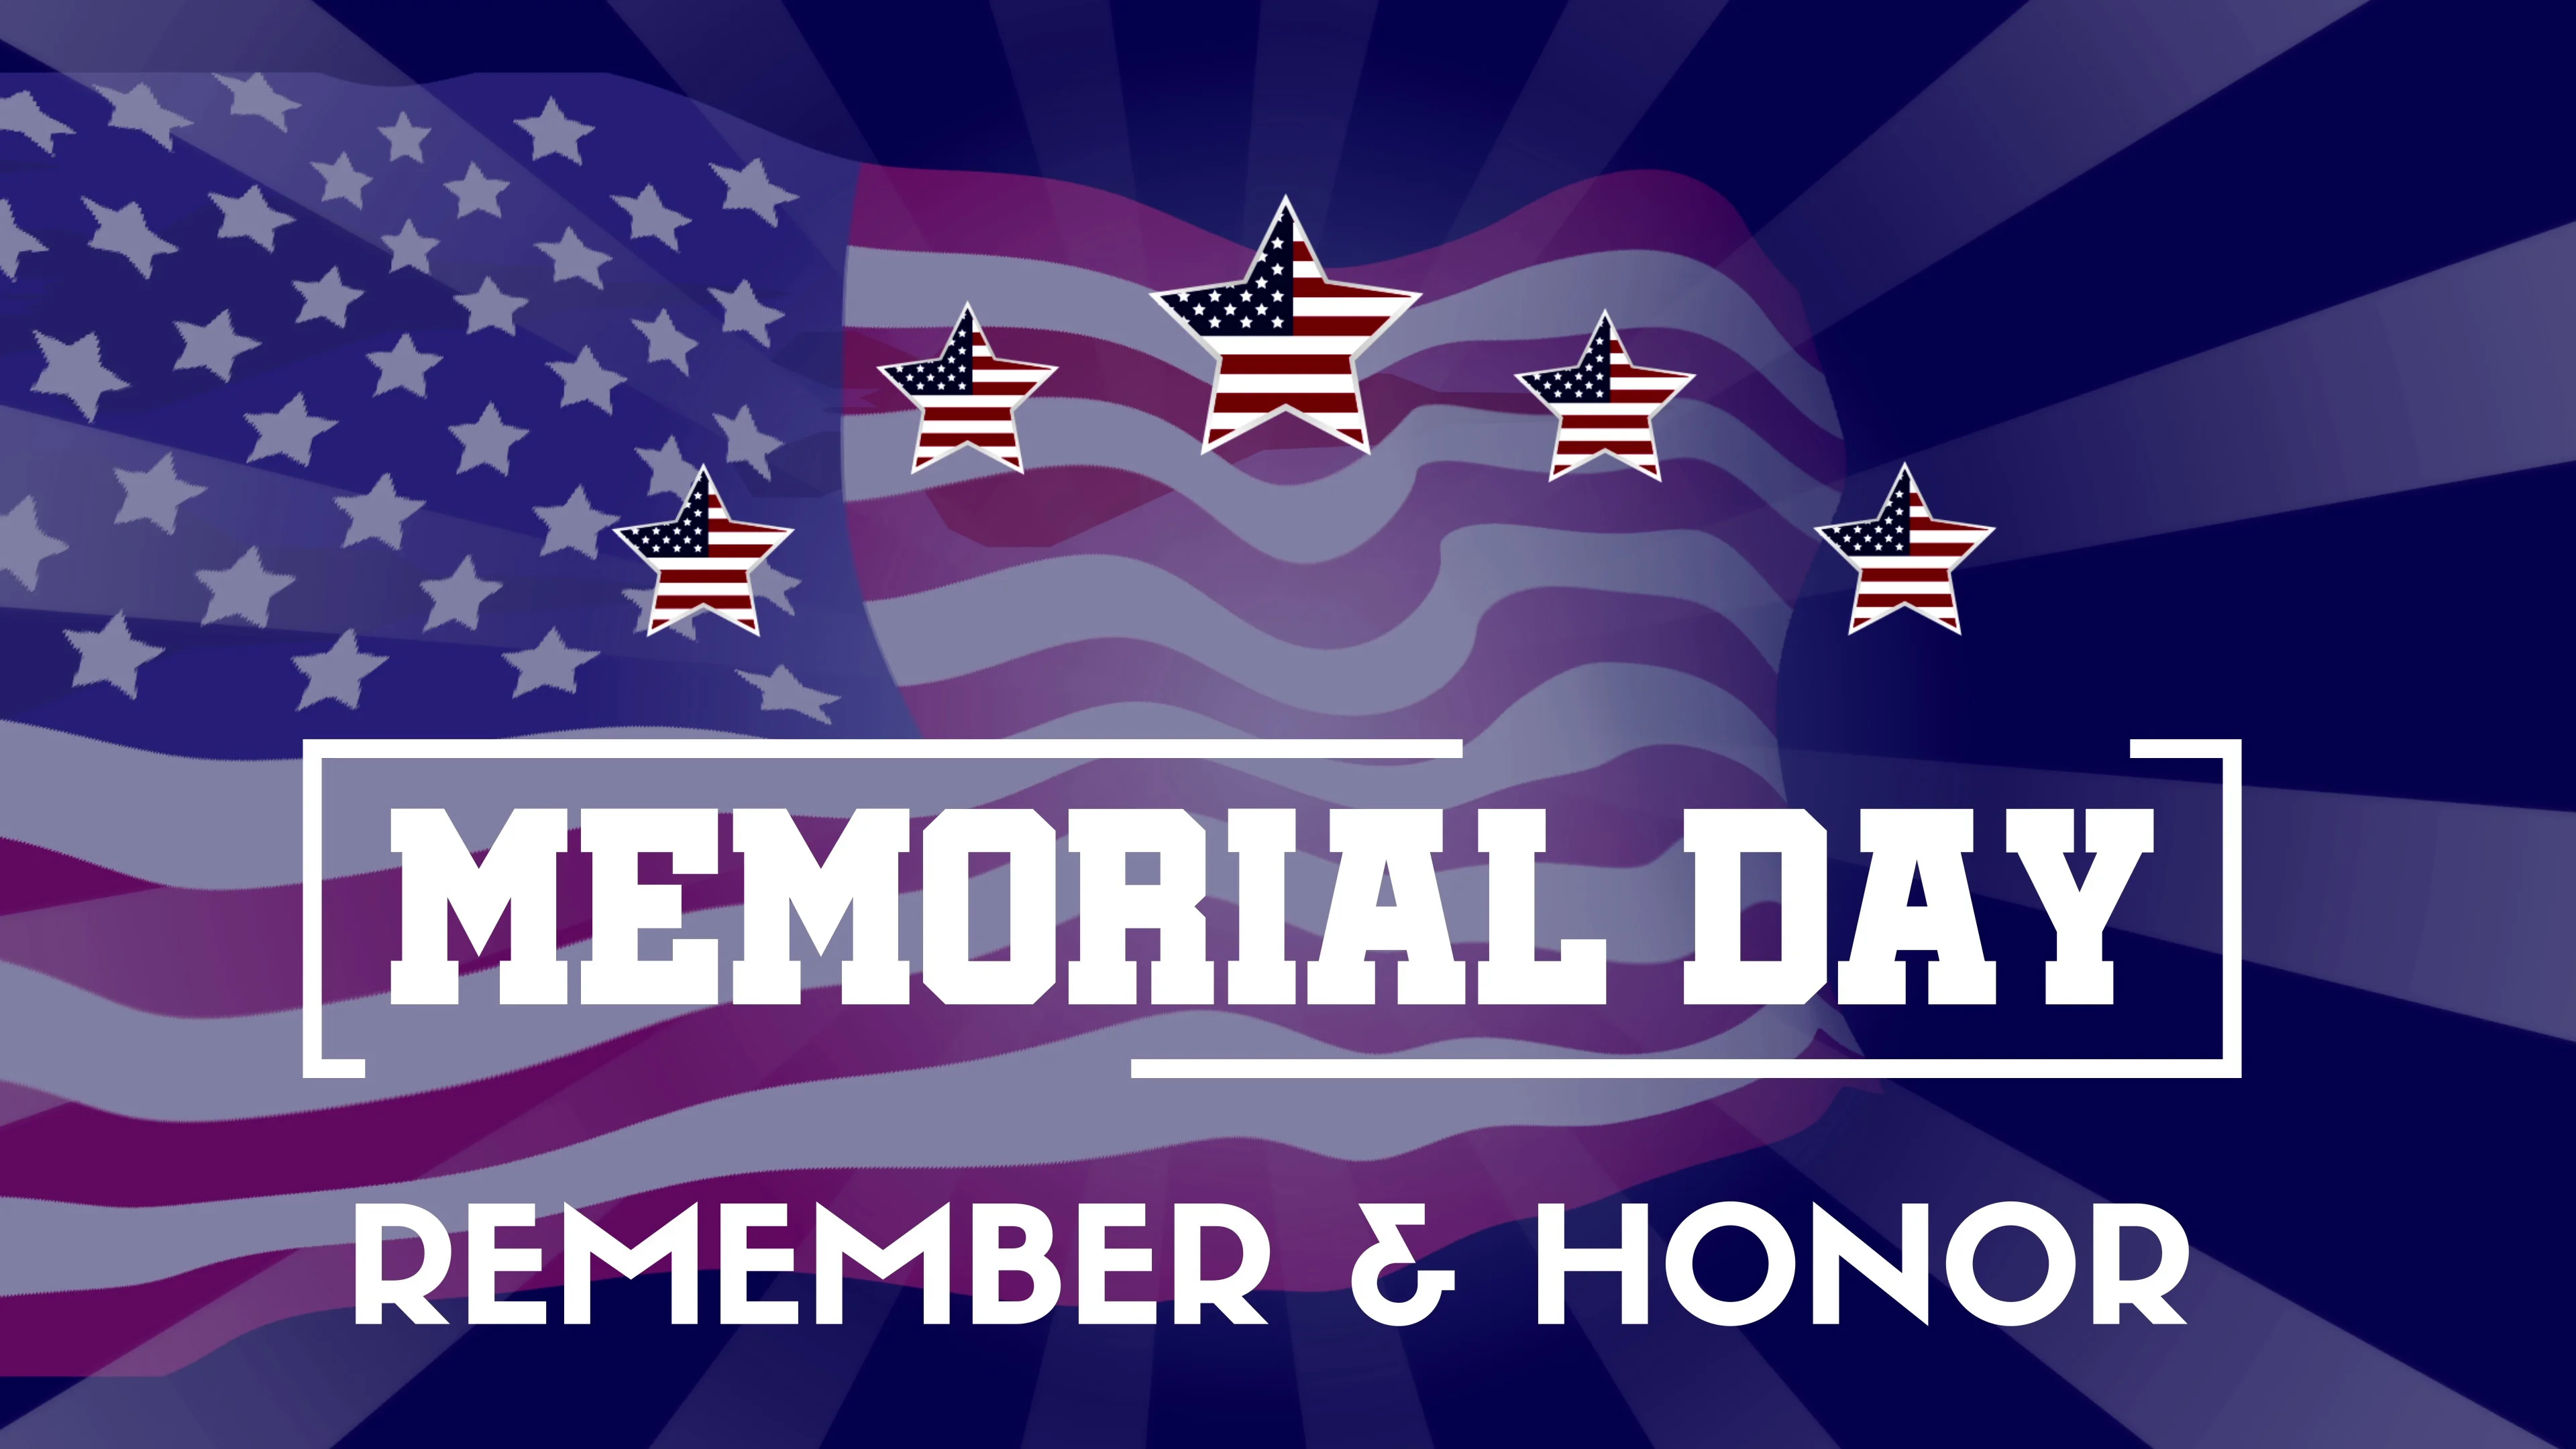 Happy Memorial Day With Flag Animation | Stock Video | Pond5